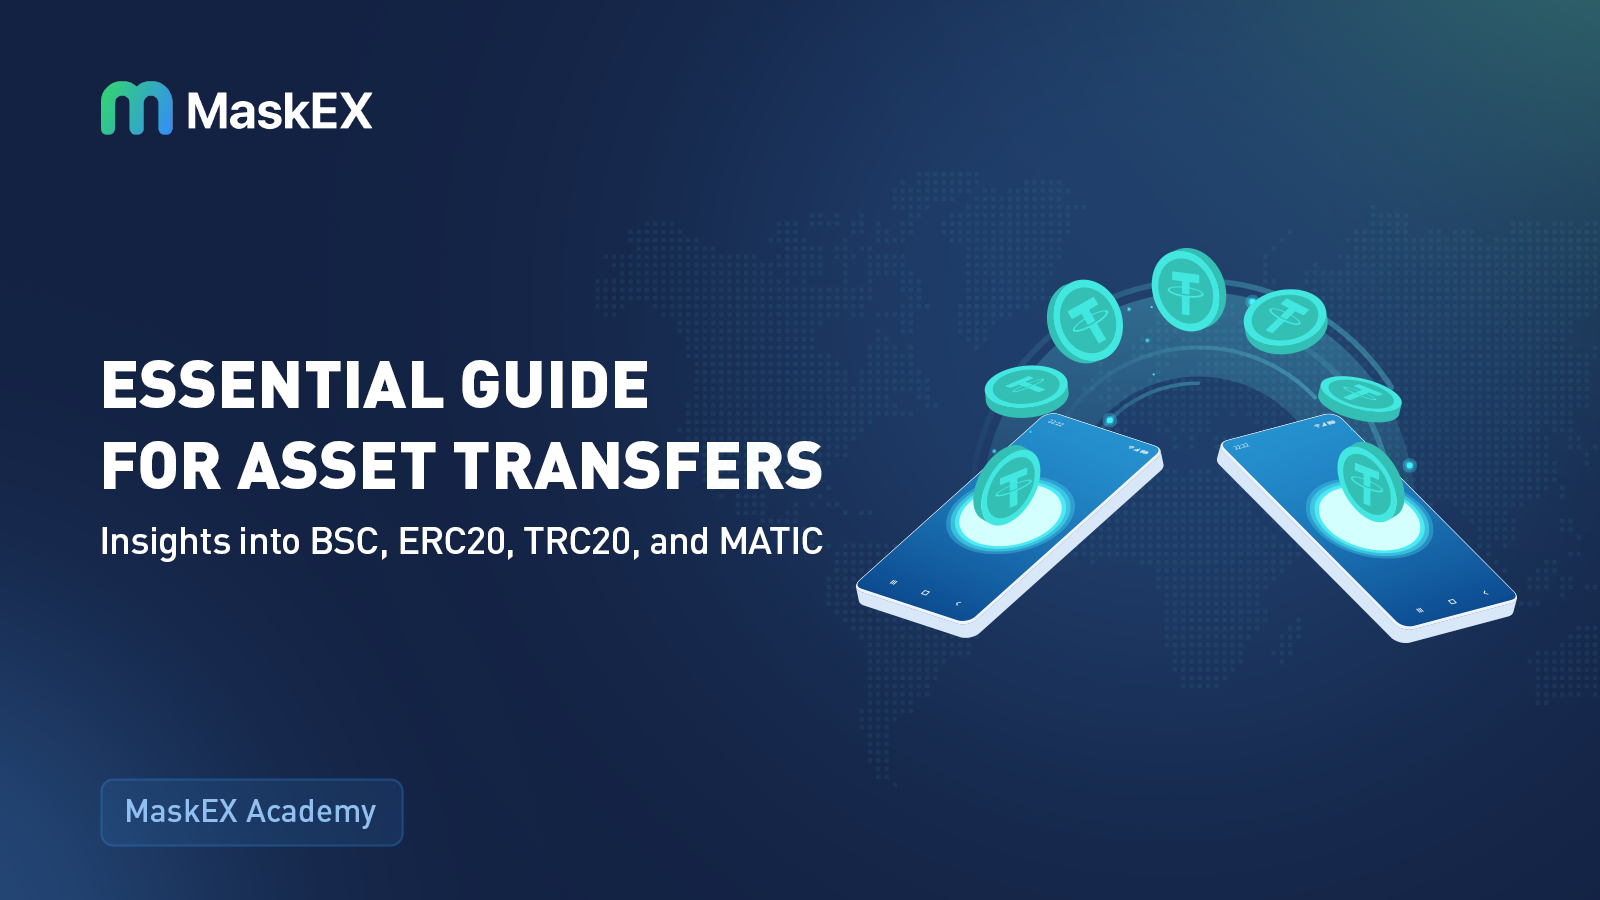 Essential Guide for Asset Transfers: Insights into BSC, ERC20, TRC20, and MATIC